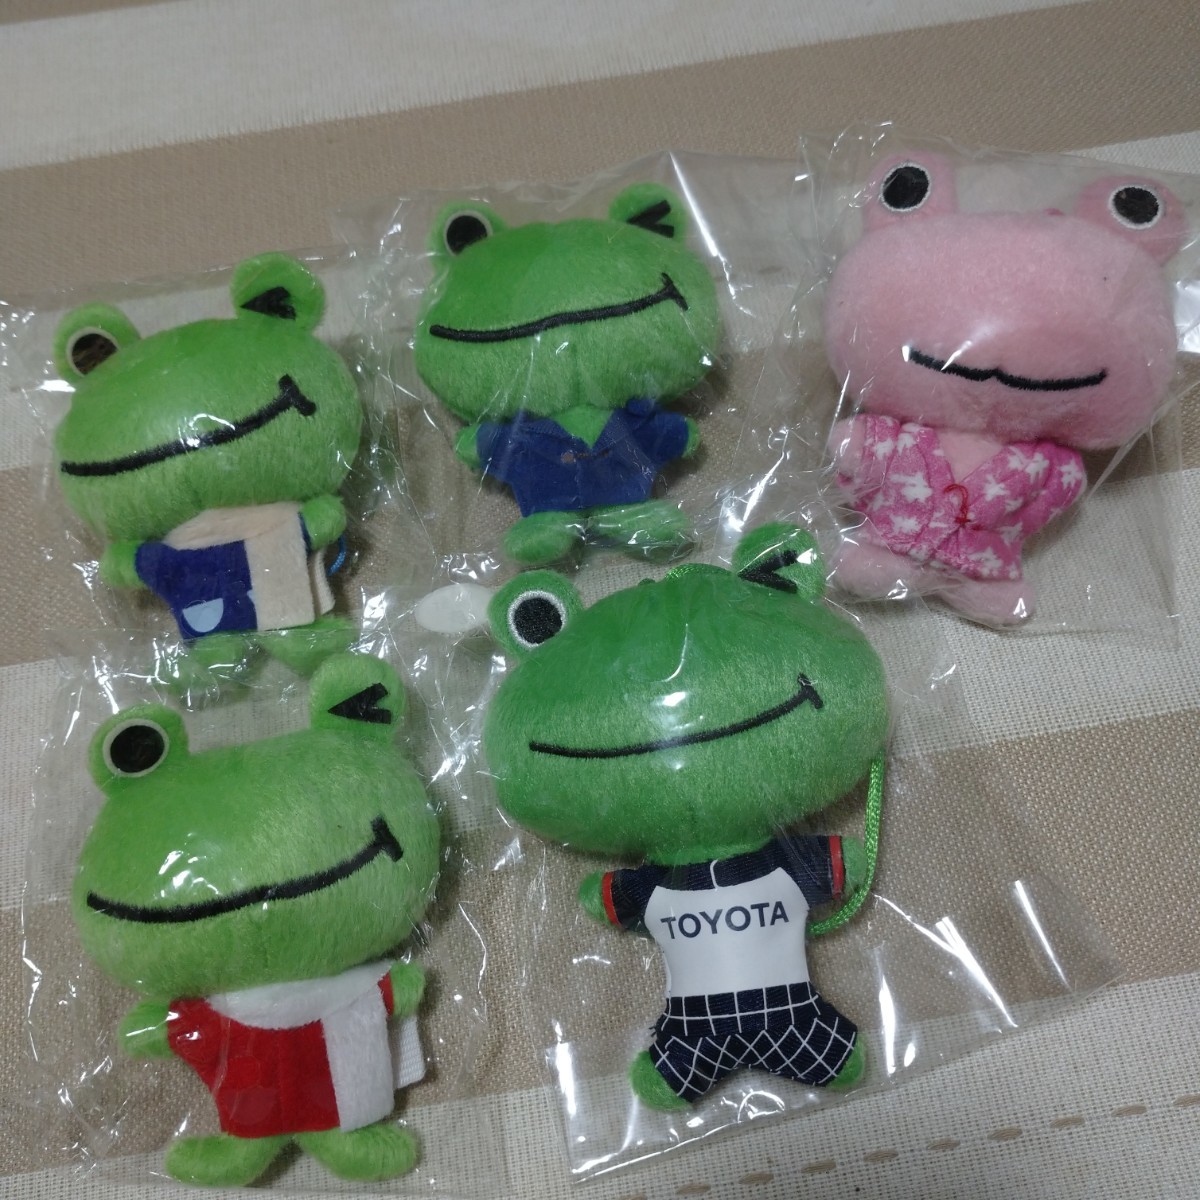 TOYOTA frog マスコット セット グッズ コレクション トヨタ ロゴ 非売品 ノベルティ 限定 カエル limited mascot collection character ⑦_画像1